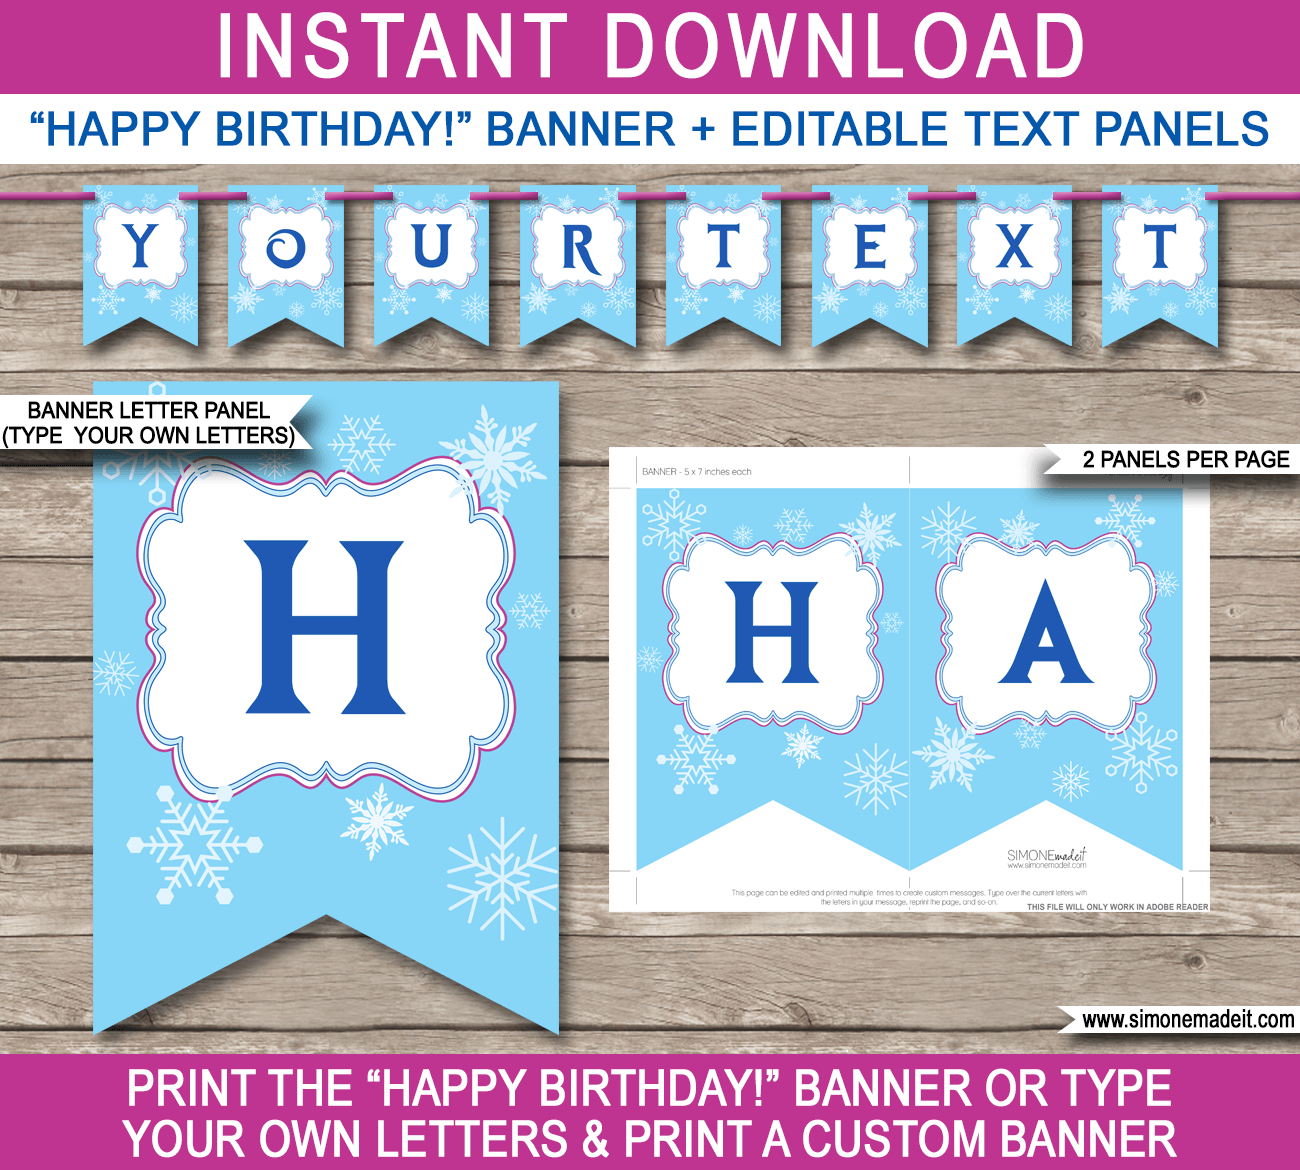 Frozen Party Banner Template - Frozen Bunting - Happy Birthday Banner - Birthday Party - Editable and Printable DIY Template - INSTANT DOWNLOAD $4.50 via simonemadeit.com